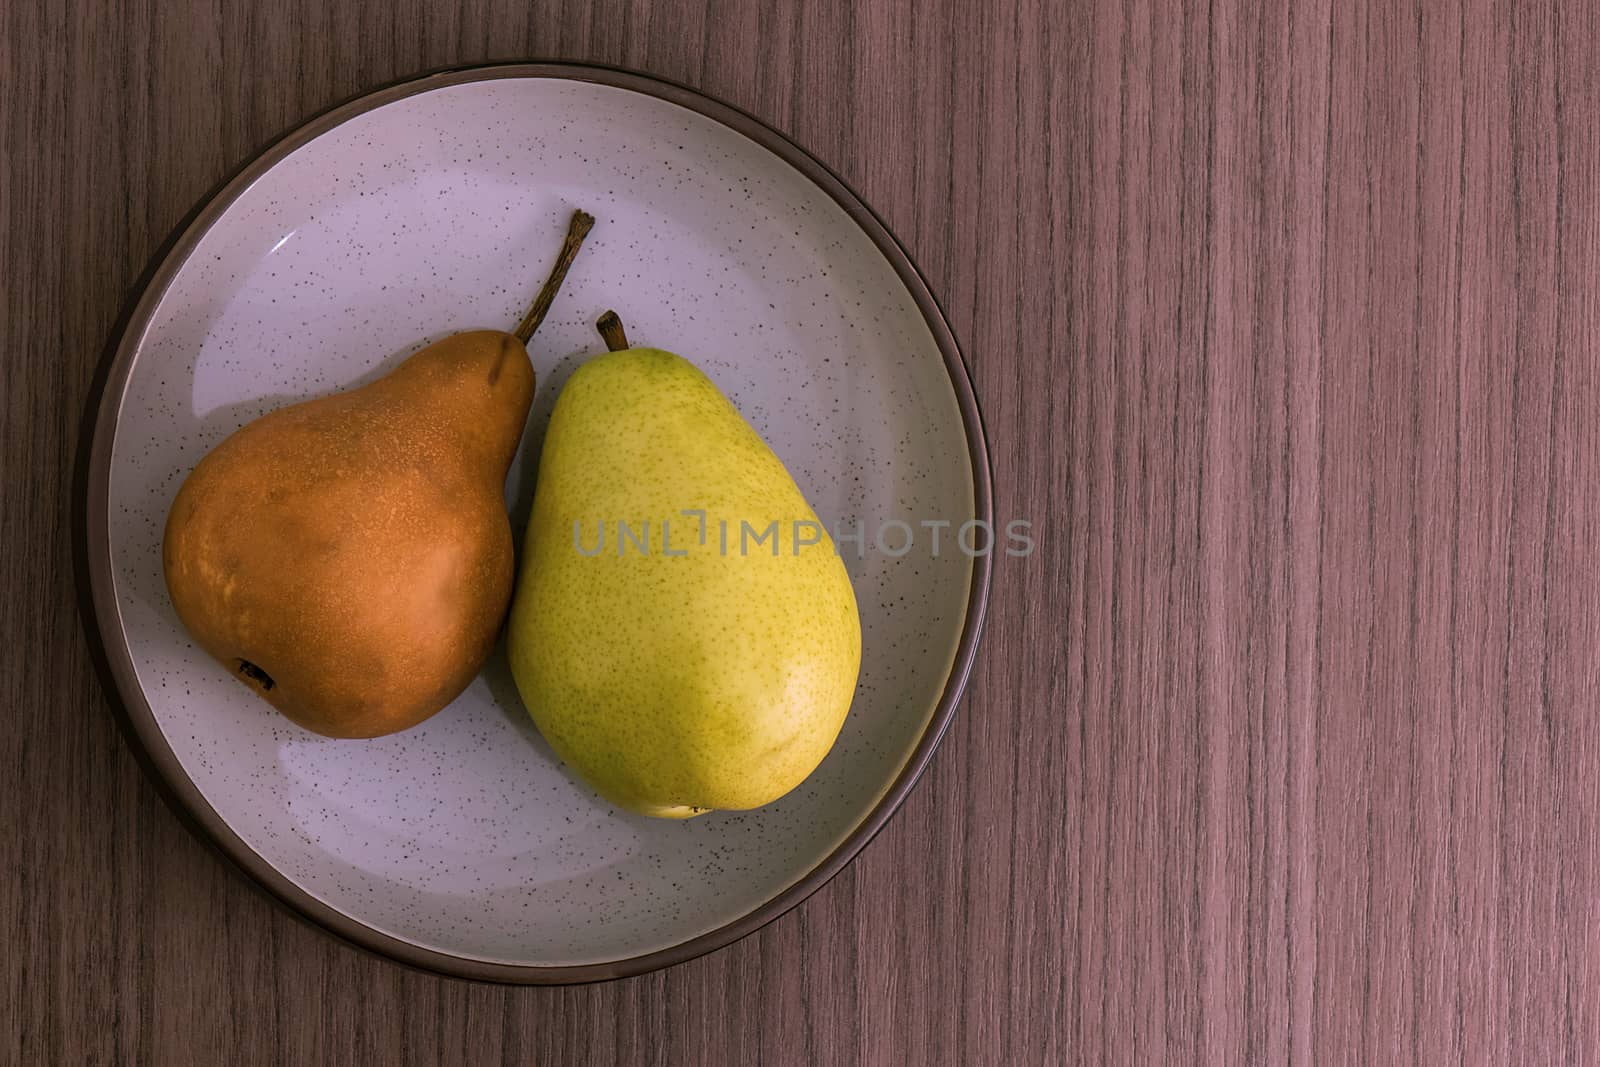 Golden and green pears by dalomo84